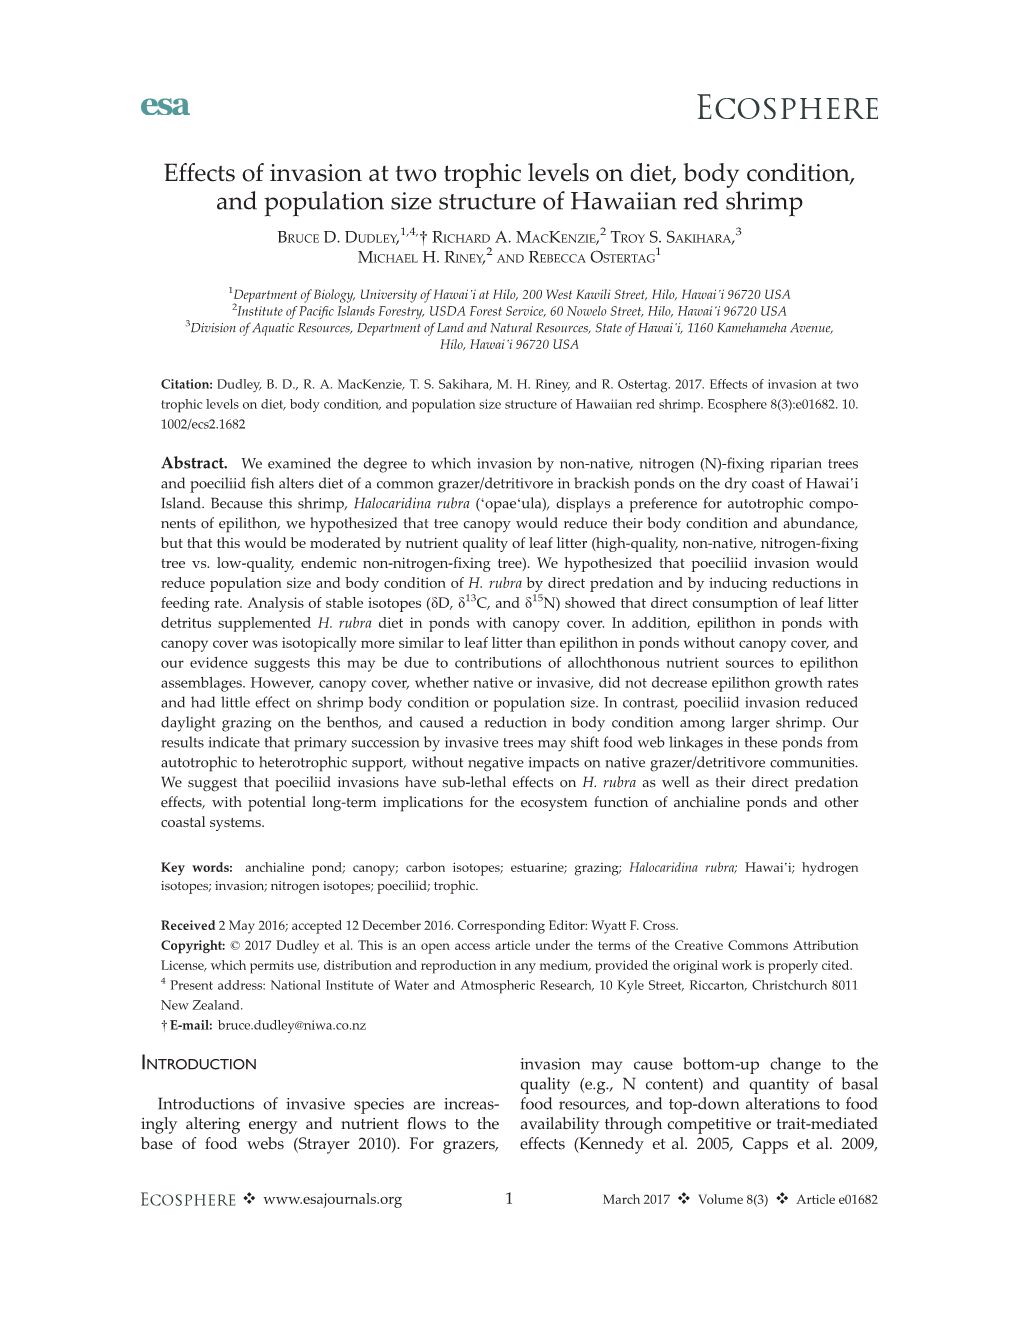 Effects of Invasion at Two Trophic Levels on Diet, Body Condition, and Population Size Structure of Hawaiian Red Shrimp 1,4, 2 3 BRUCE D